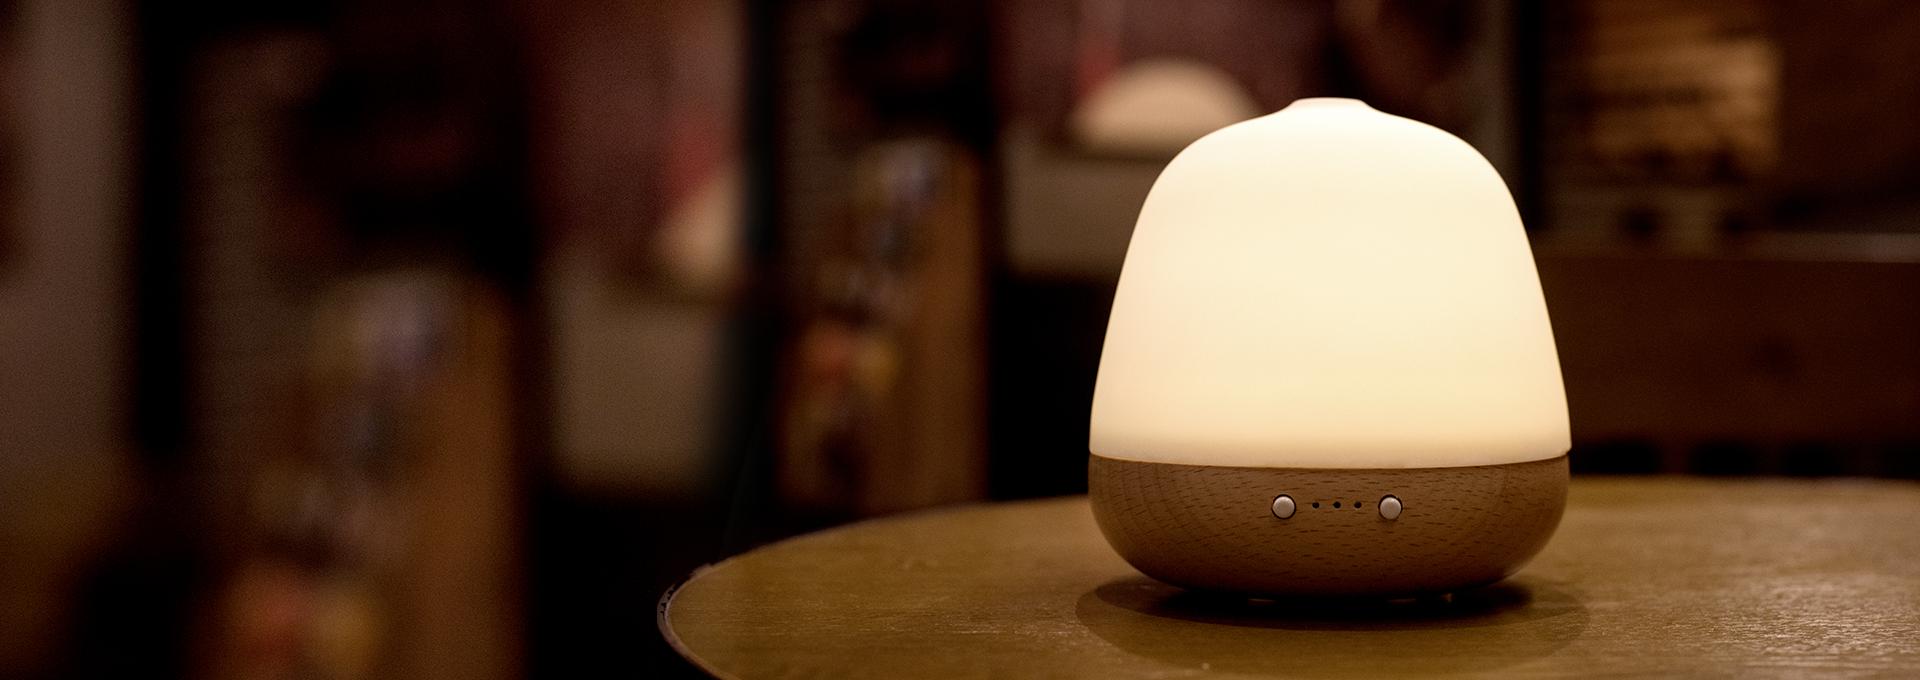 Benefits Of Water Aroma Diffuser